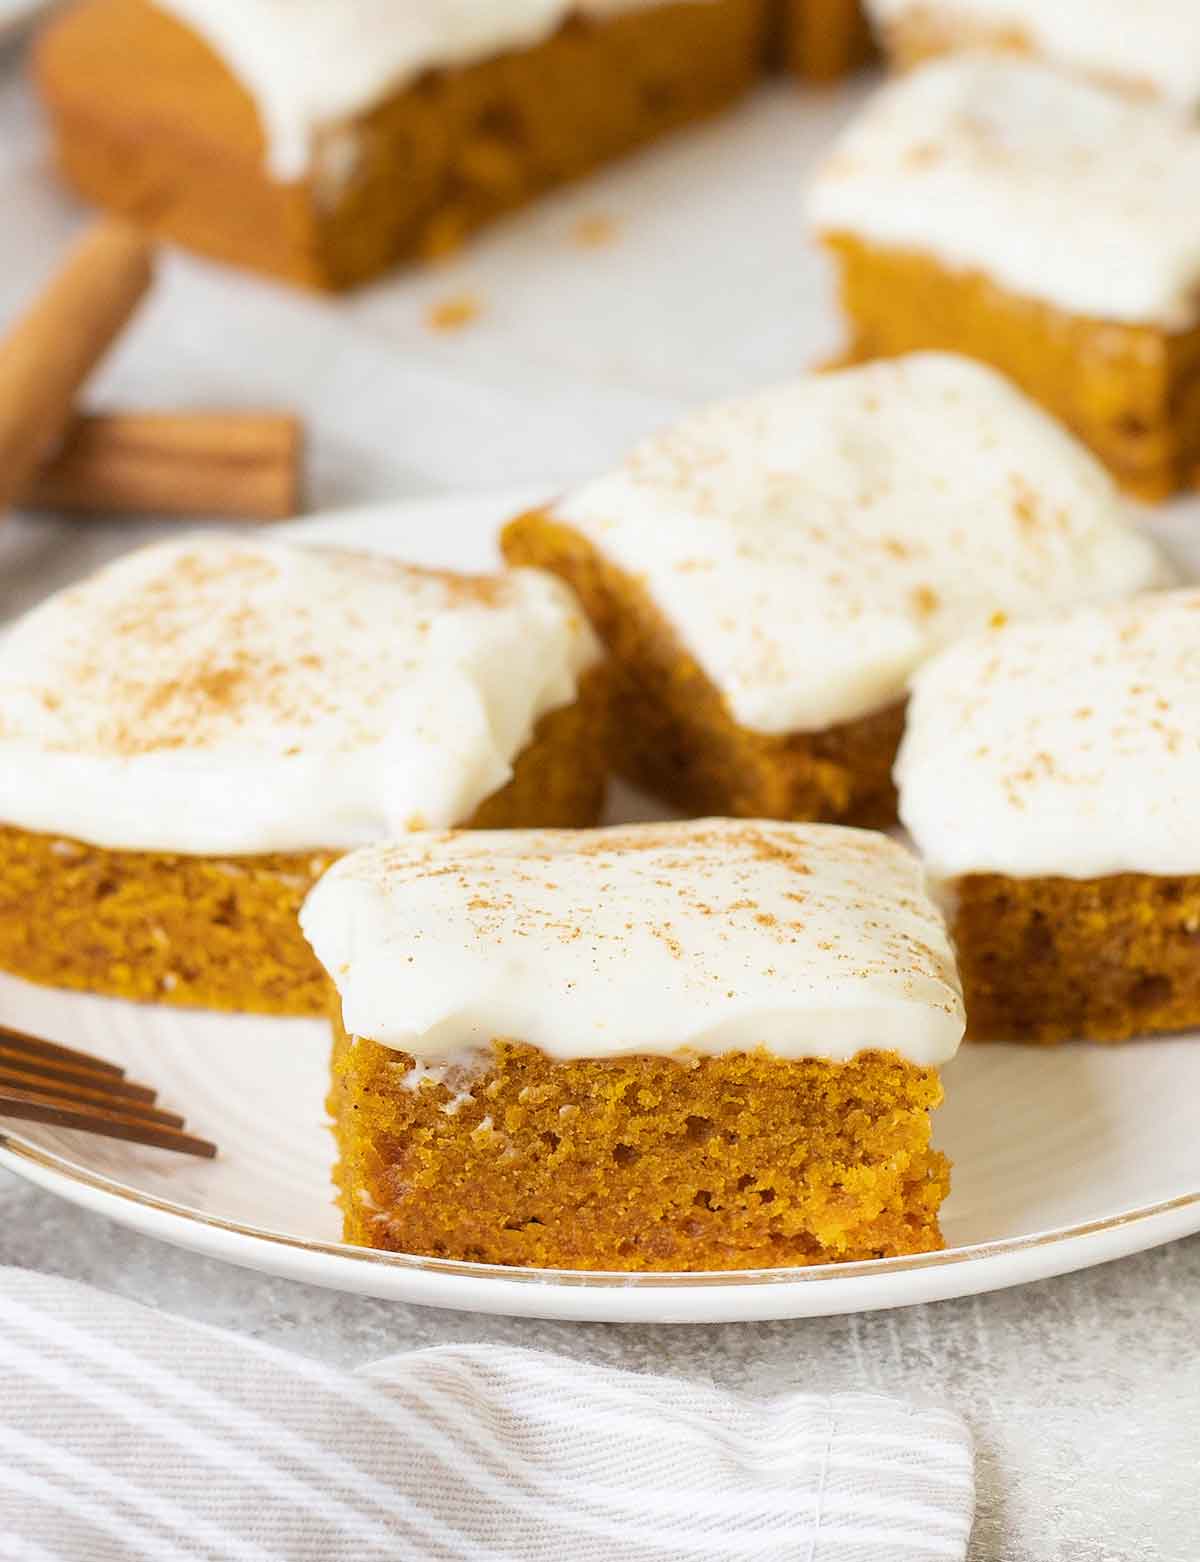 Some of the Pumpkin bars are in a serving plate topped with Cream Cheese Frosting.